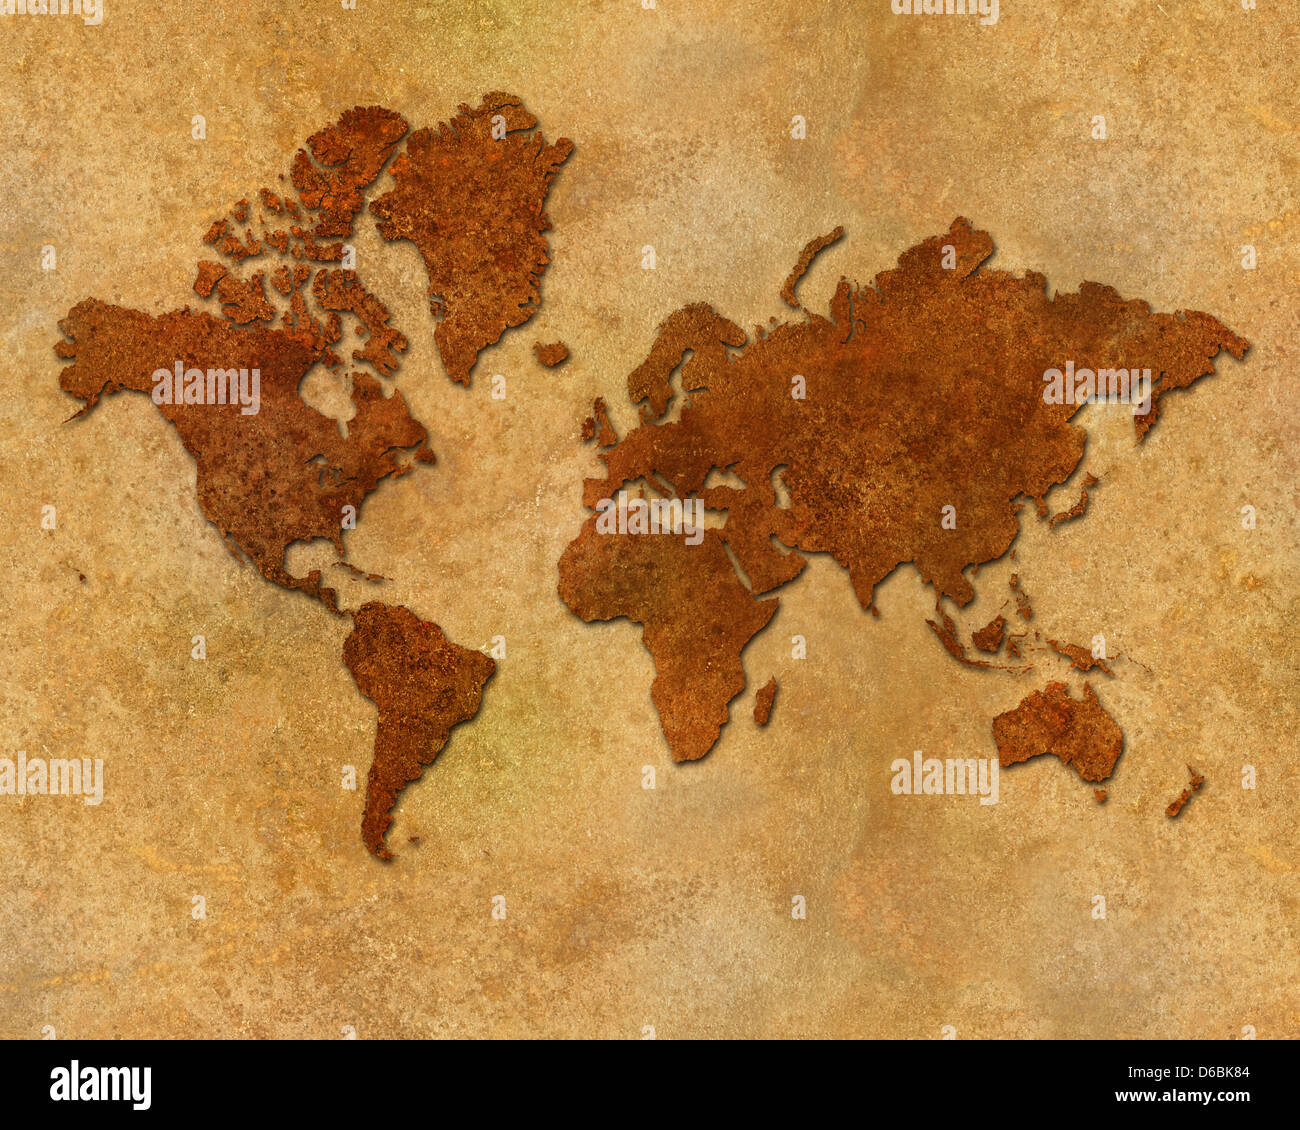 Distressed global map Stock Photo